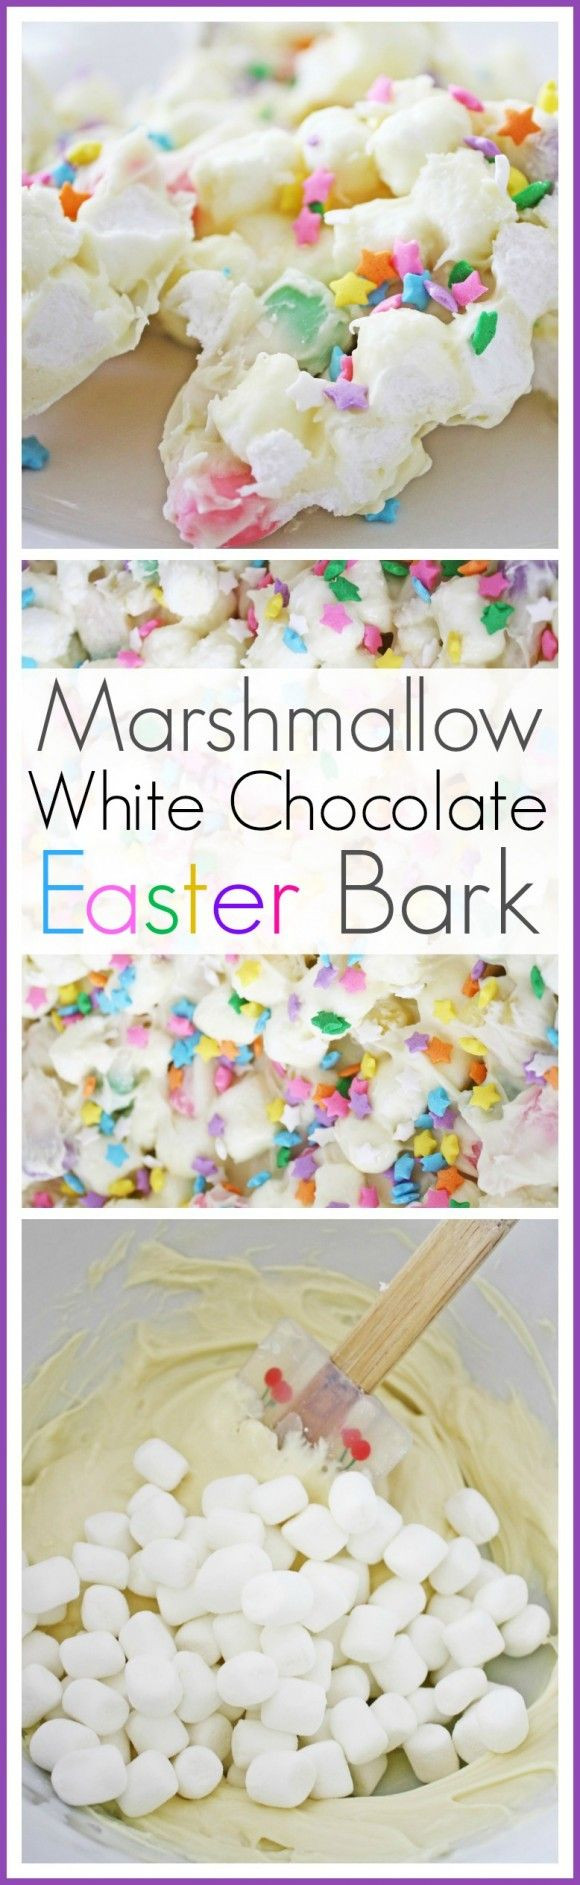 Easter Party Ideas For Work
 Marshmallow White Chocolate Bark Recipe This will work